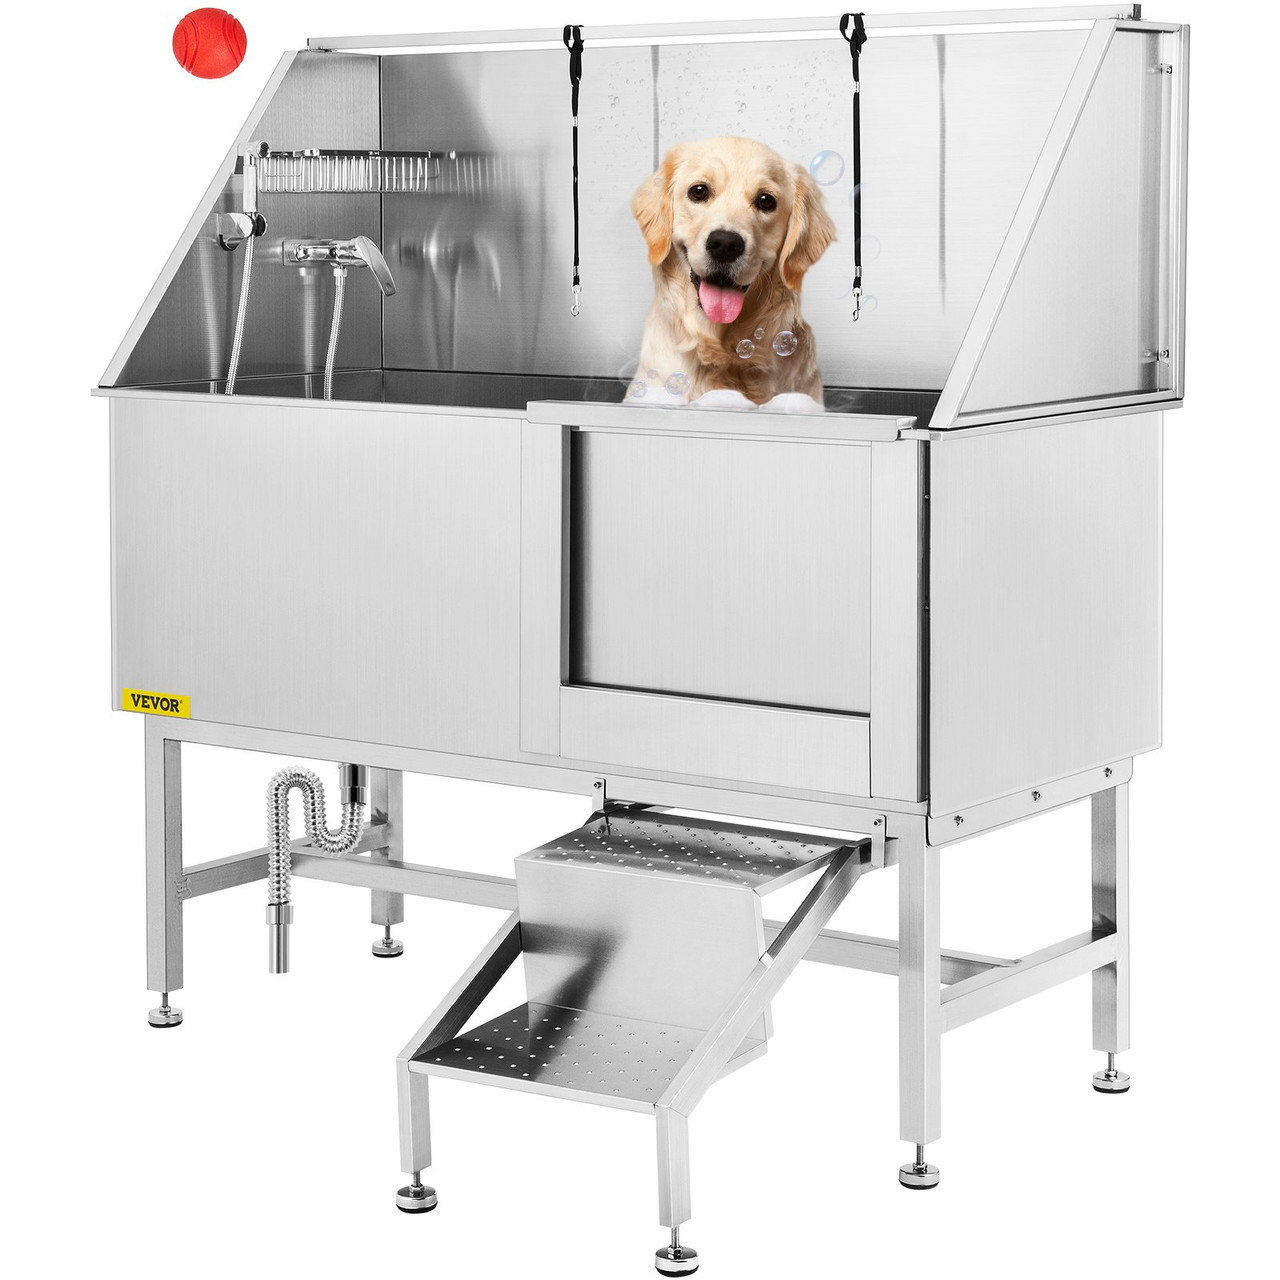 VEVOR 50 inch Dog Grooming Tub Professional Stainless Steel Pet Dog Bath Tub with Steps Faucet & Accessories Dog Washing Station Right Door